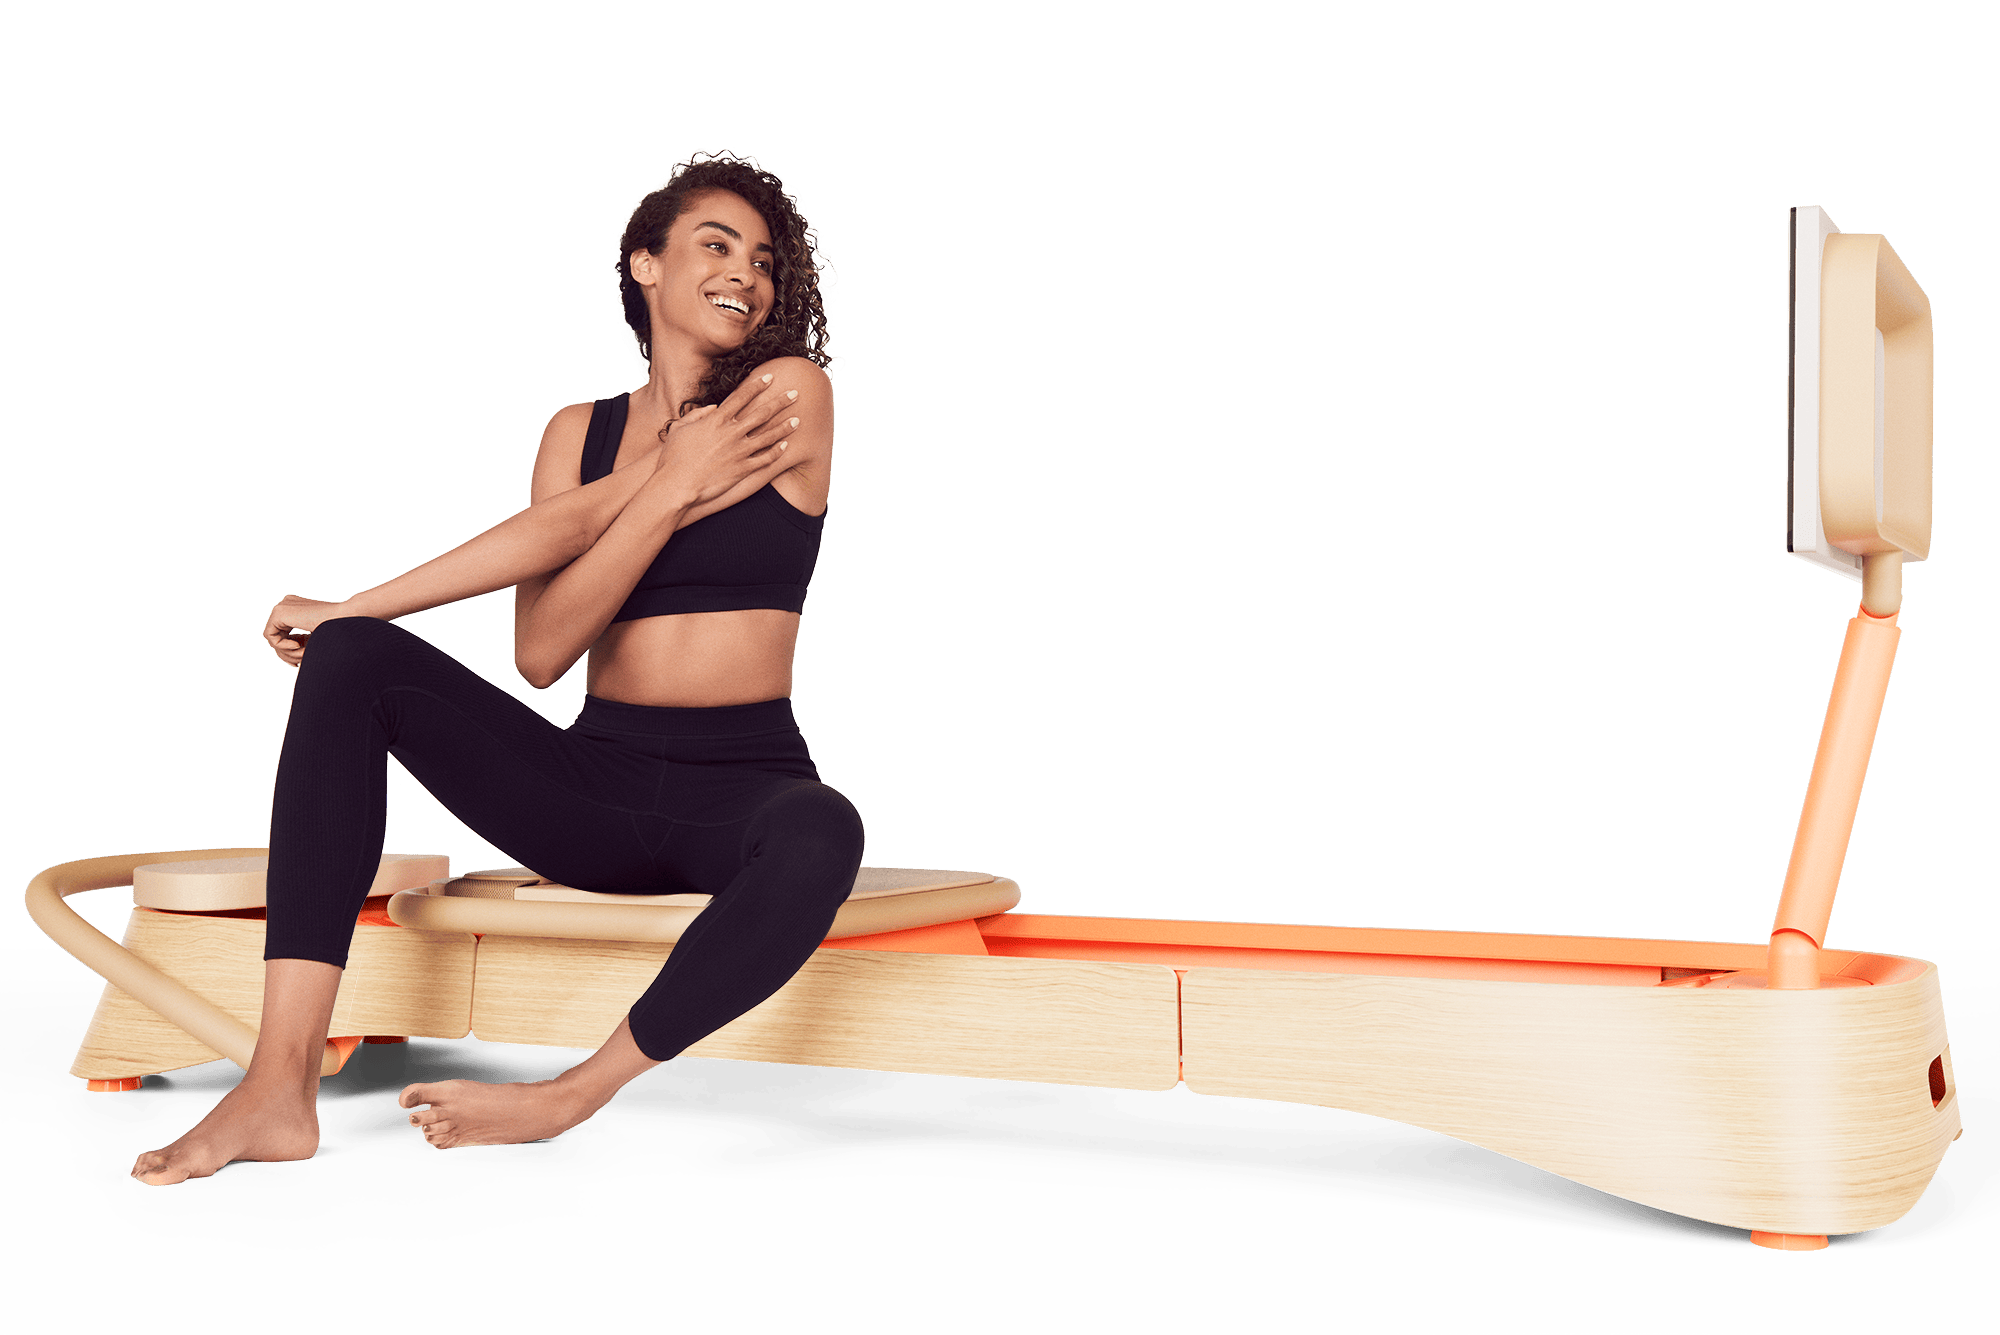 Pilates at Home - Pilates at Home Equipment